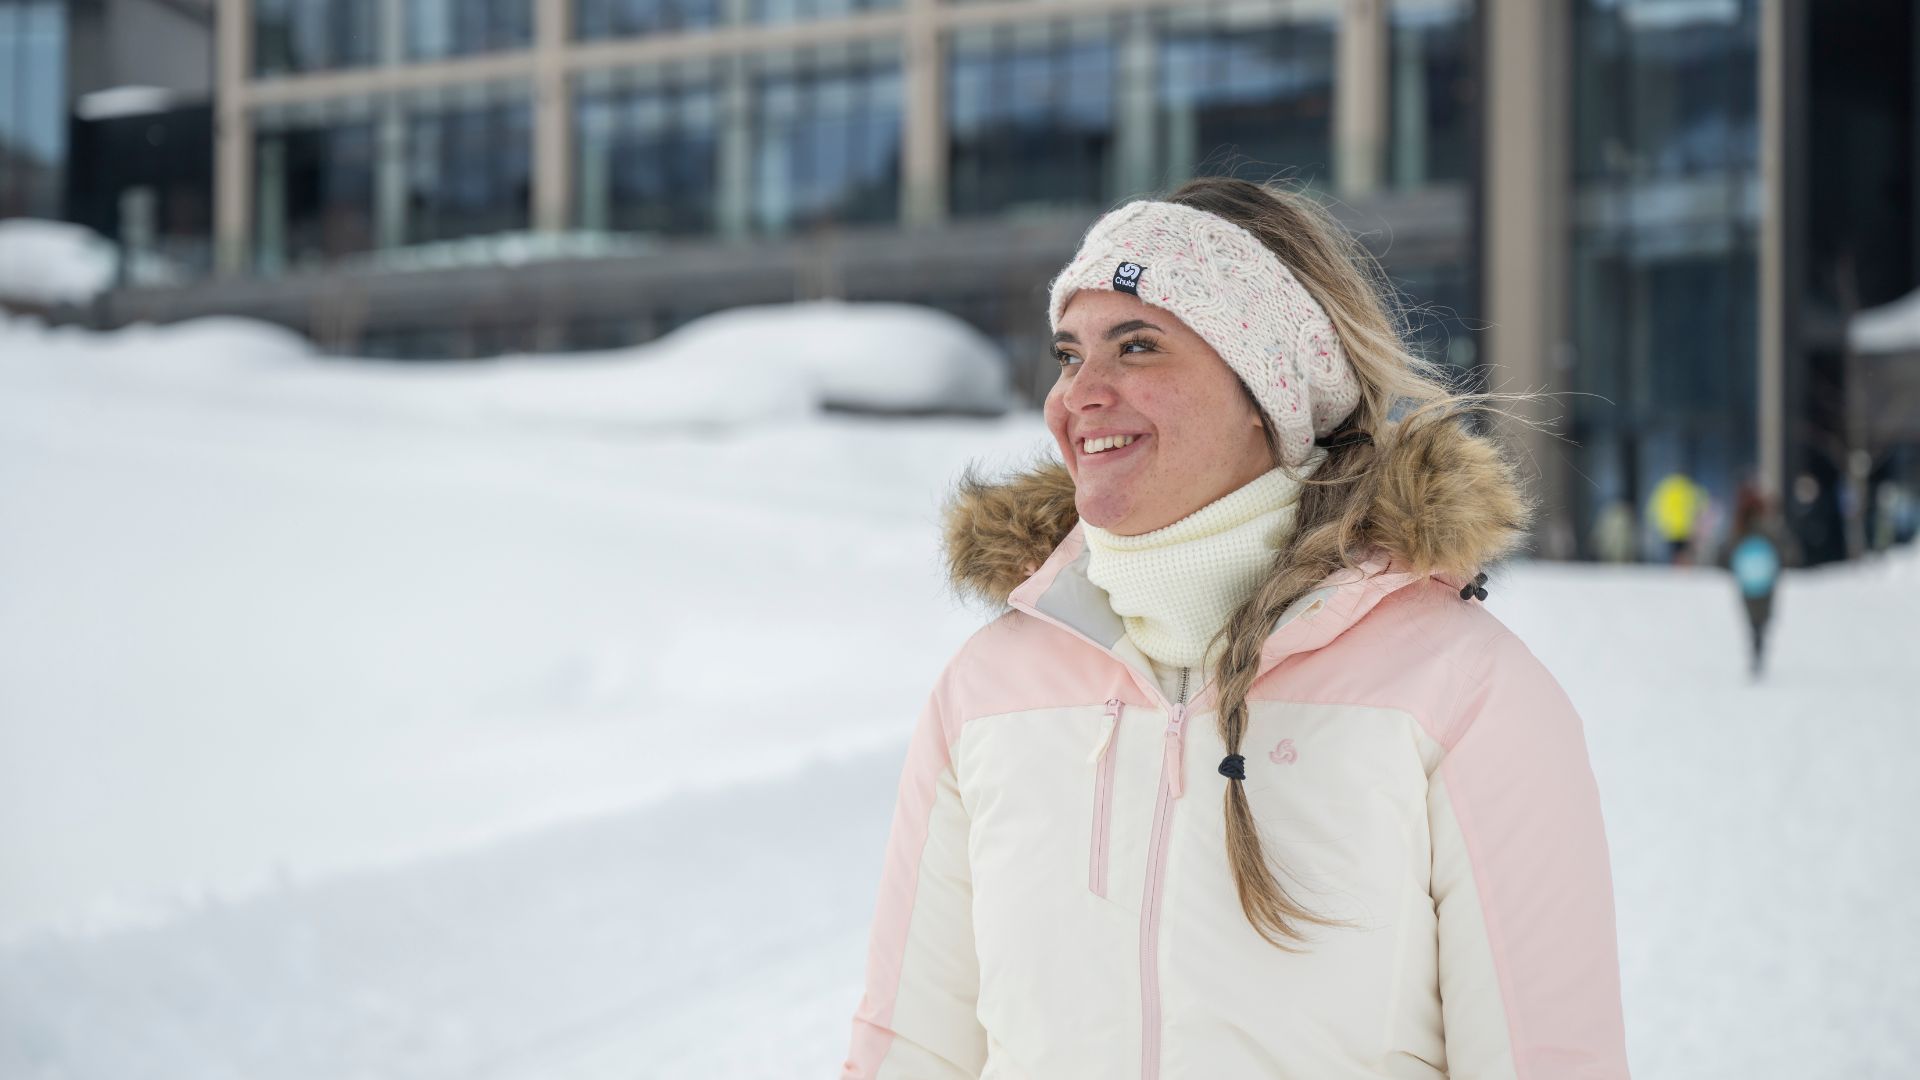 Sun Protection At The Snow FAQs